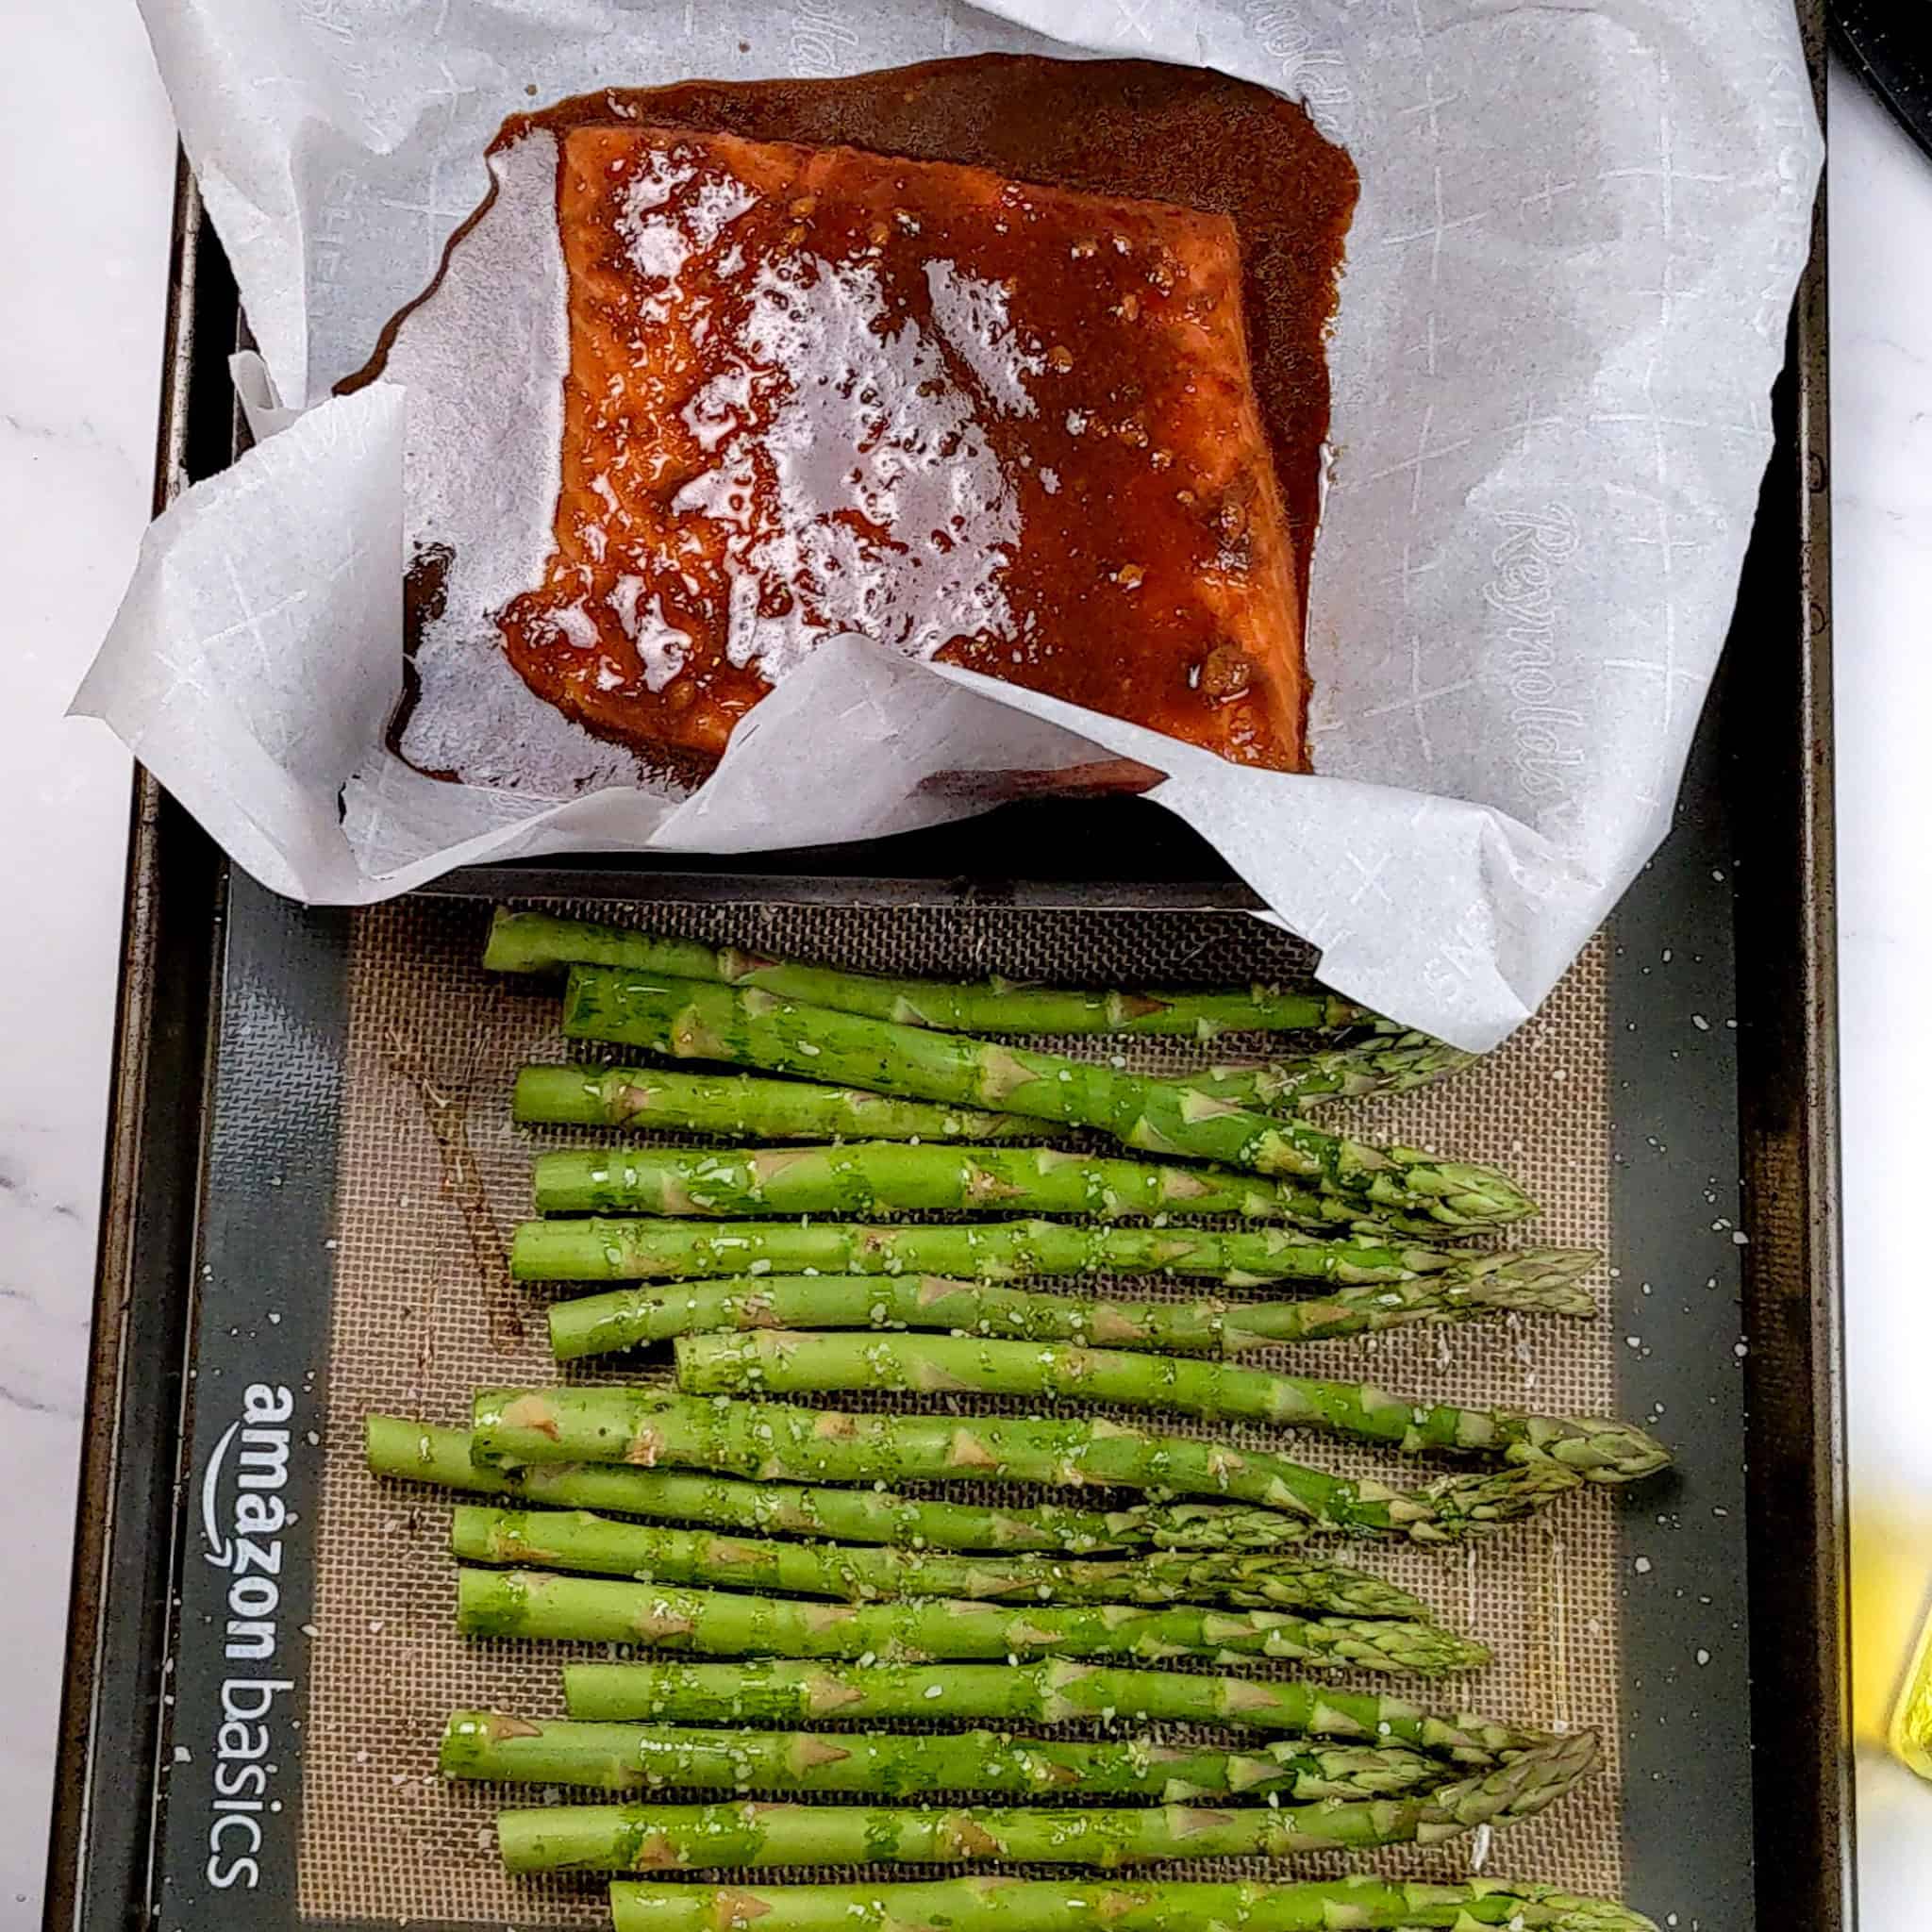 raw salmon filet drenched in the miso ginger sauce on a parchment paper lined baking dish resting on a silicone lined sheet pan with lined up asparagus seasoned with oil, salt and pepper.